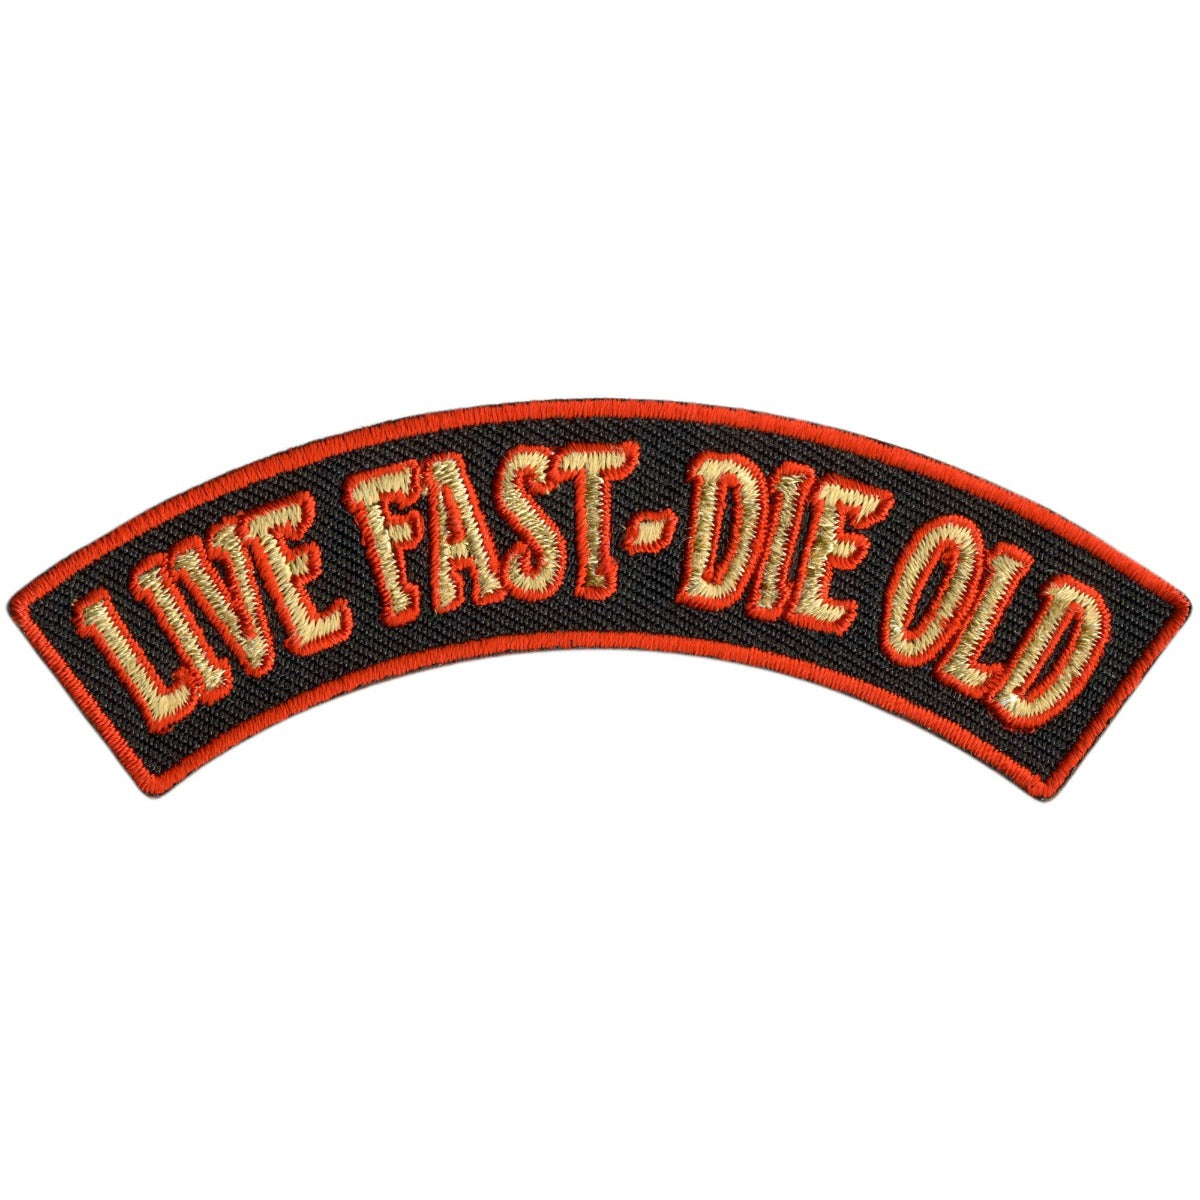 A Hot Leathers Live Fast - Die Old 4” X 1” Top Rocker Patch, suitable for ironing on or sewing onto clothing. Includes patch sewing instructions.